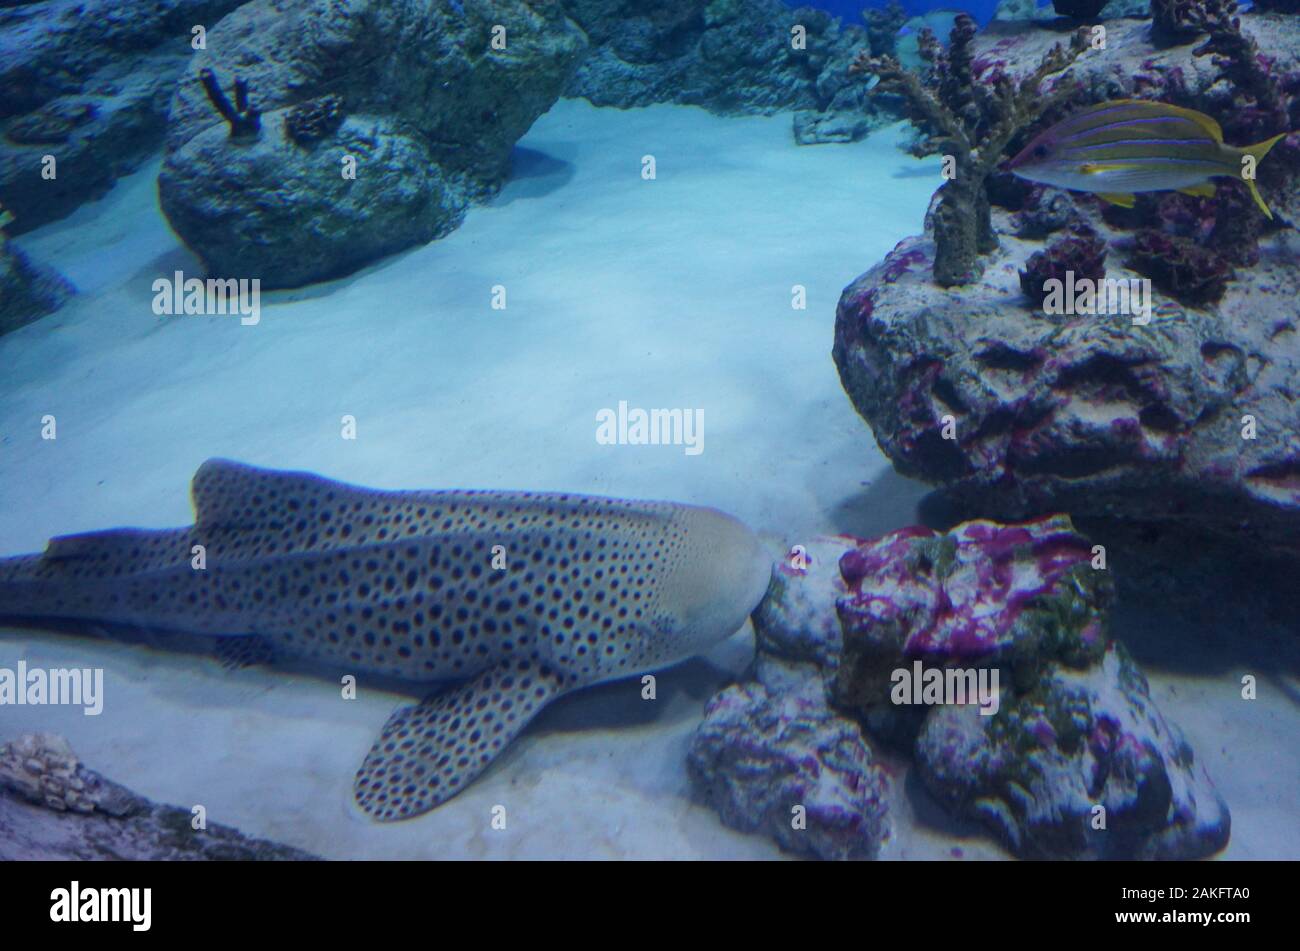 large spotted fish on the seabed Stock Photo